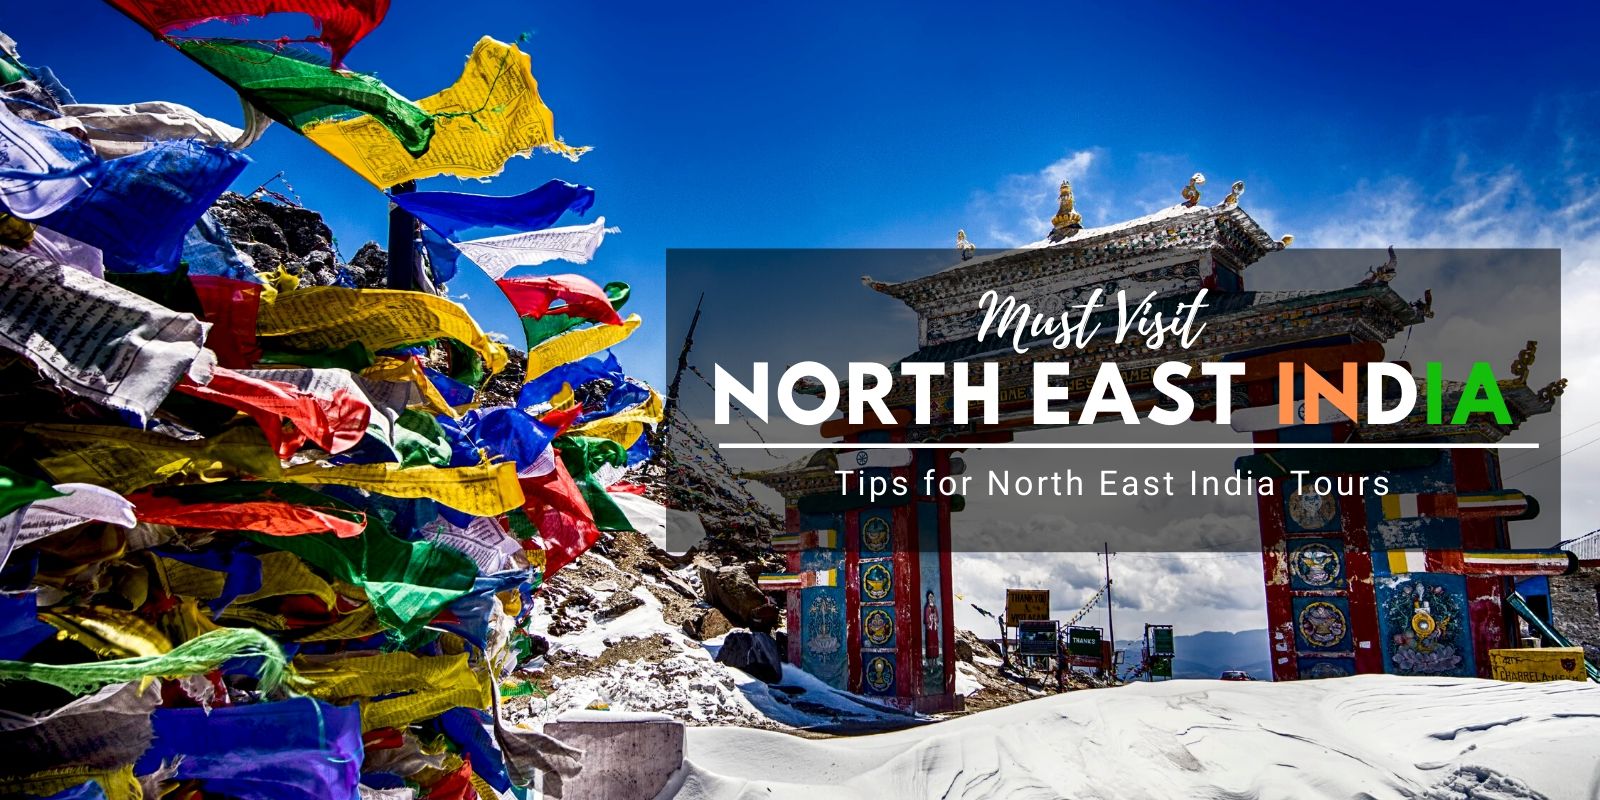 Tips for North East India Tours – How to Make Your Trip Memorable